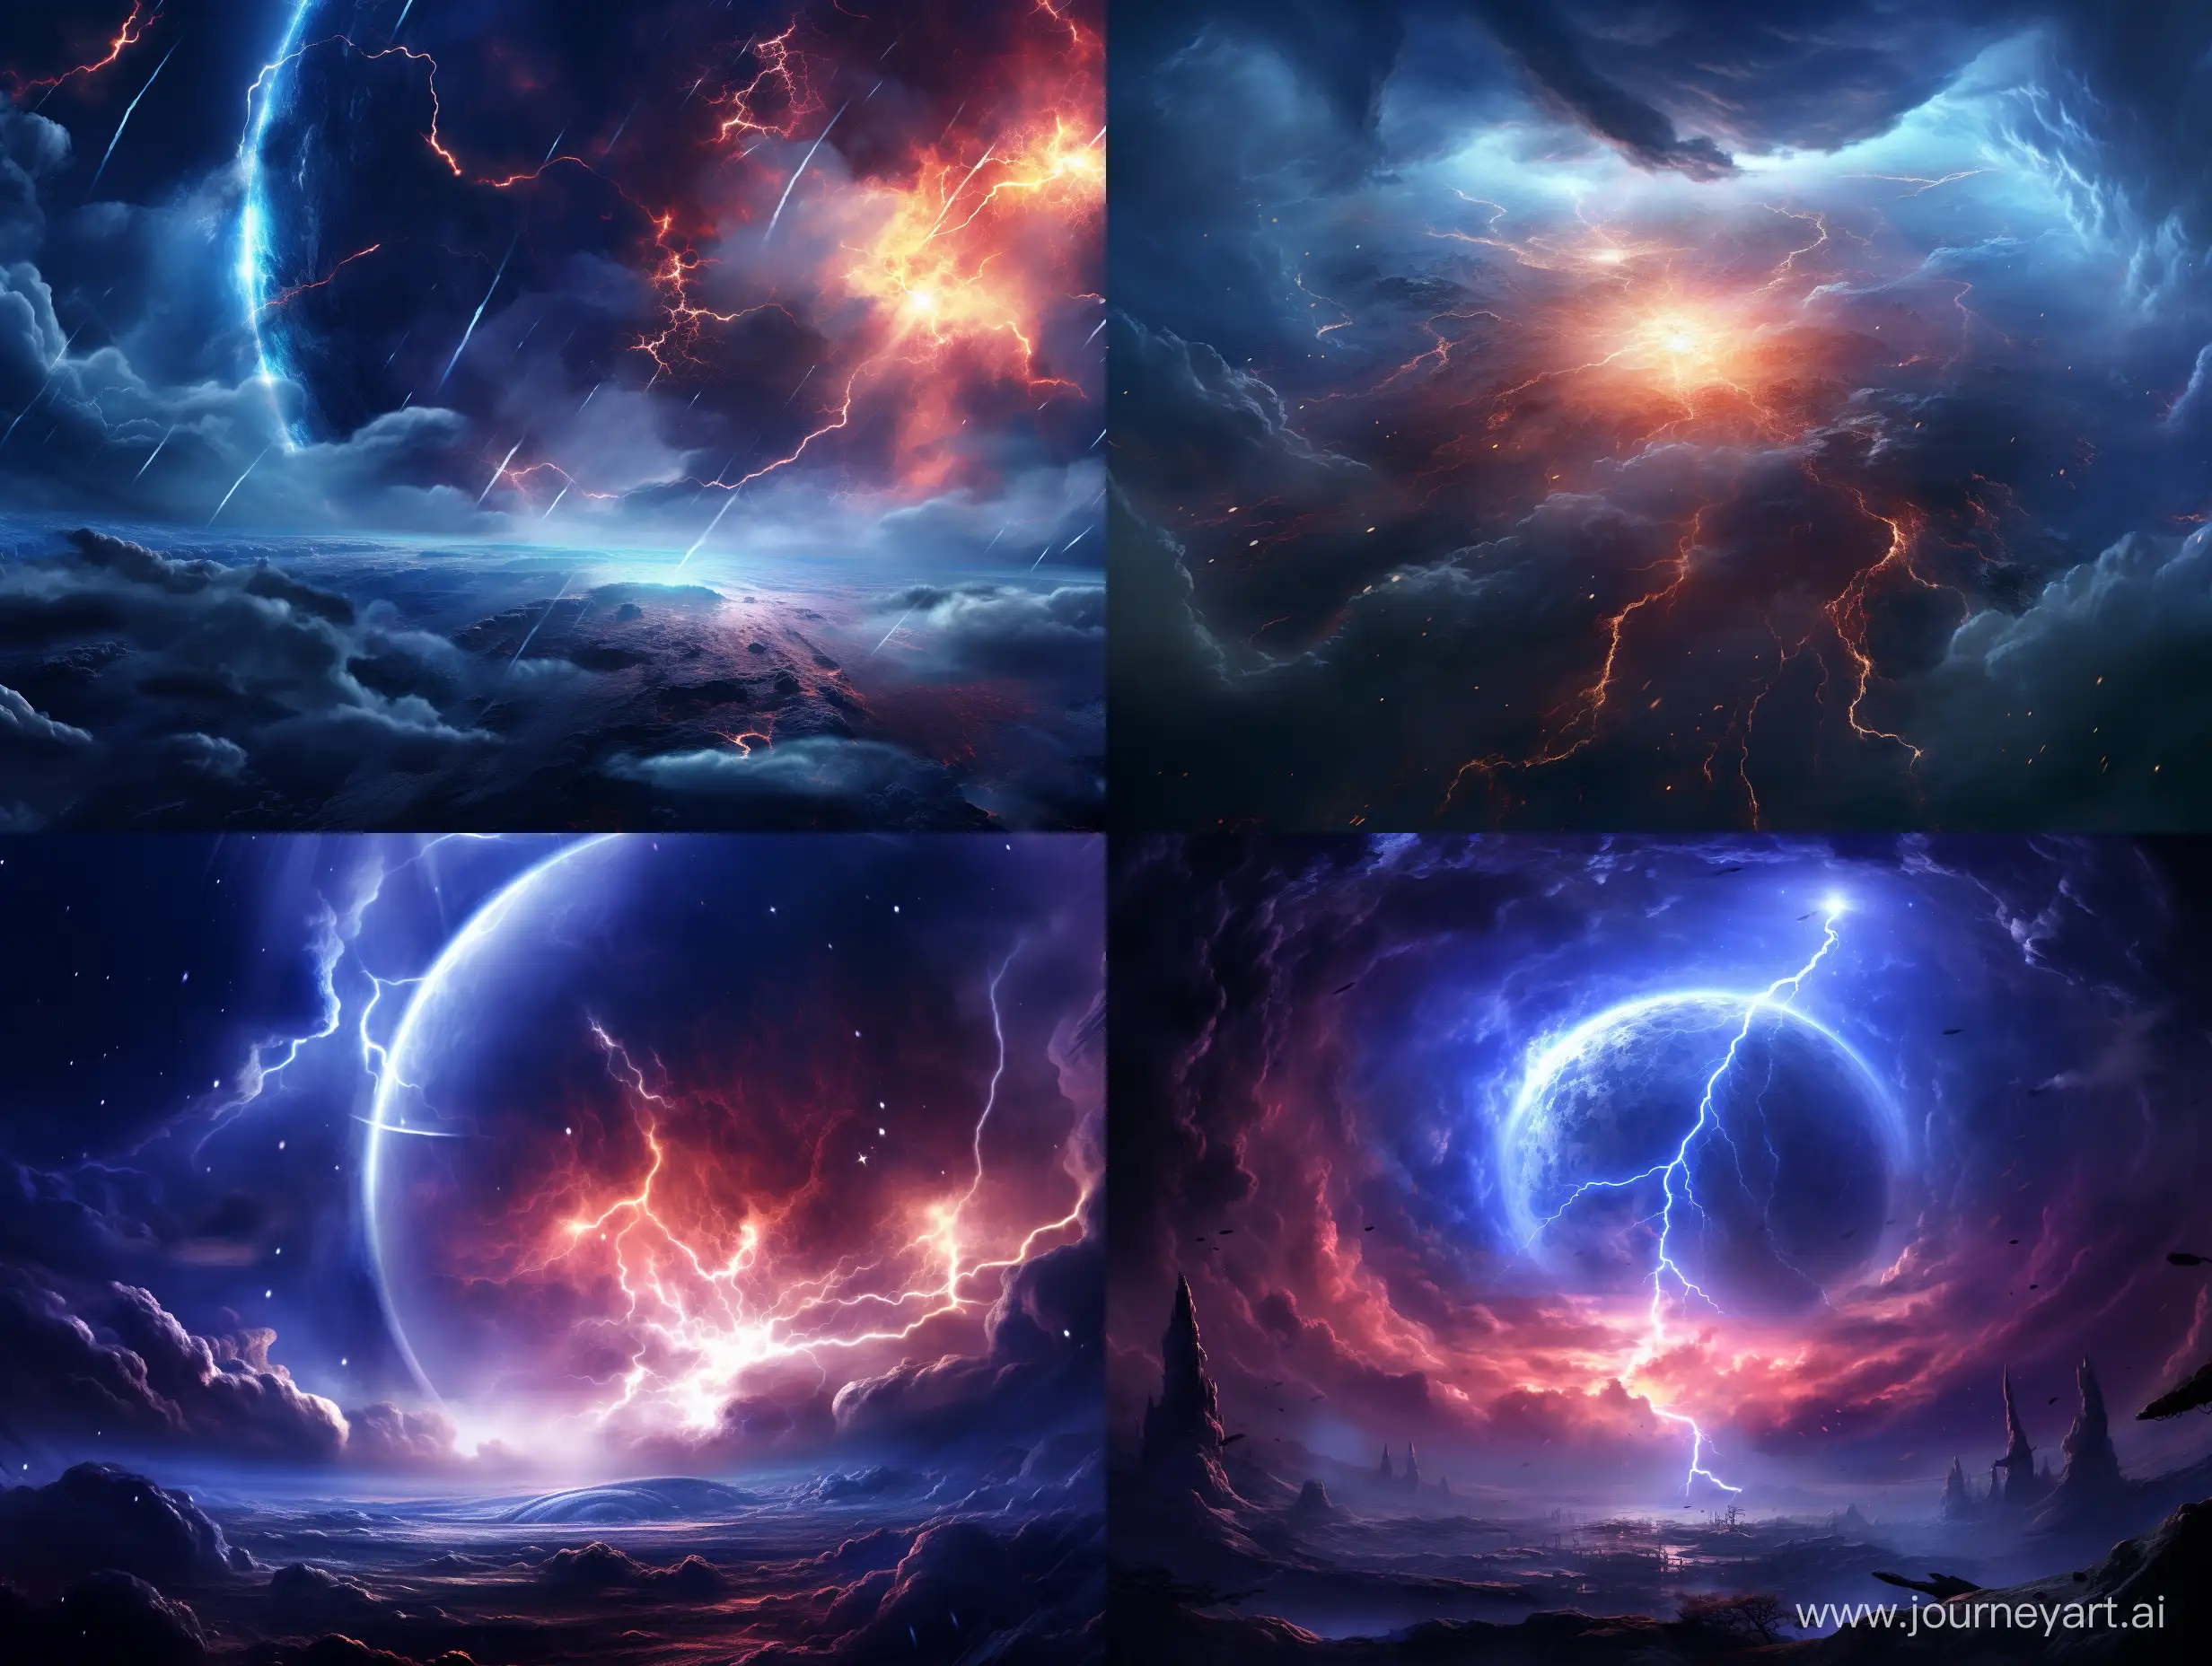 Mystical-Gas-Planet-with-Vortices-and-Thunderstorm-Lightning-in-Galaxy-Sky